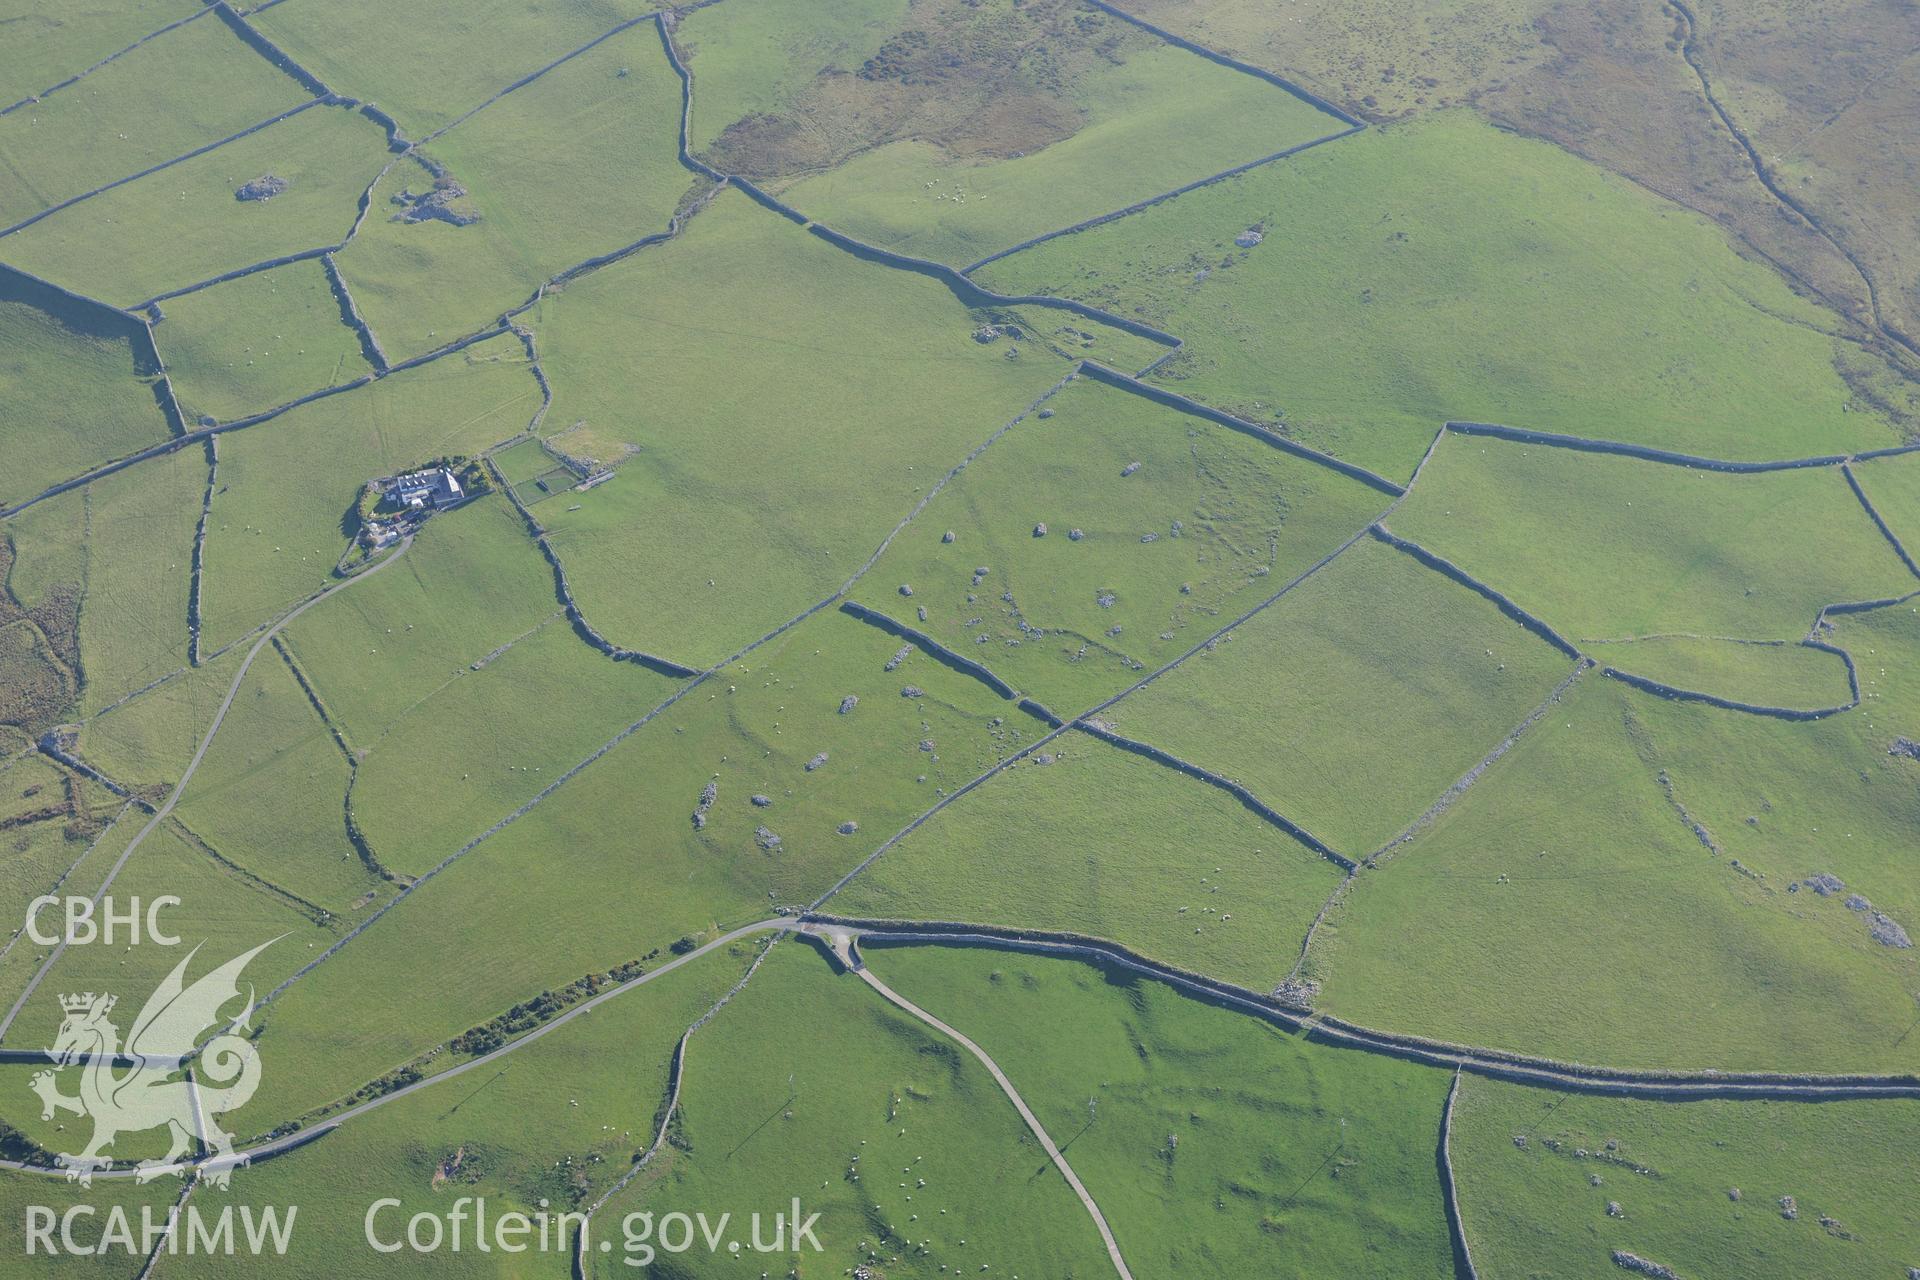 Rhiwgaeron farm, Llwyngwril. Oblique aerial photograph taken during the Royal Commission's programme of archaeological aerial reconnaissance by Toby Driver on 2nd October 2015.